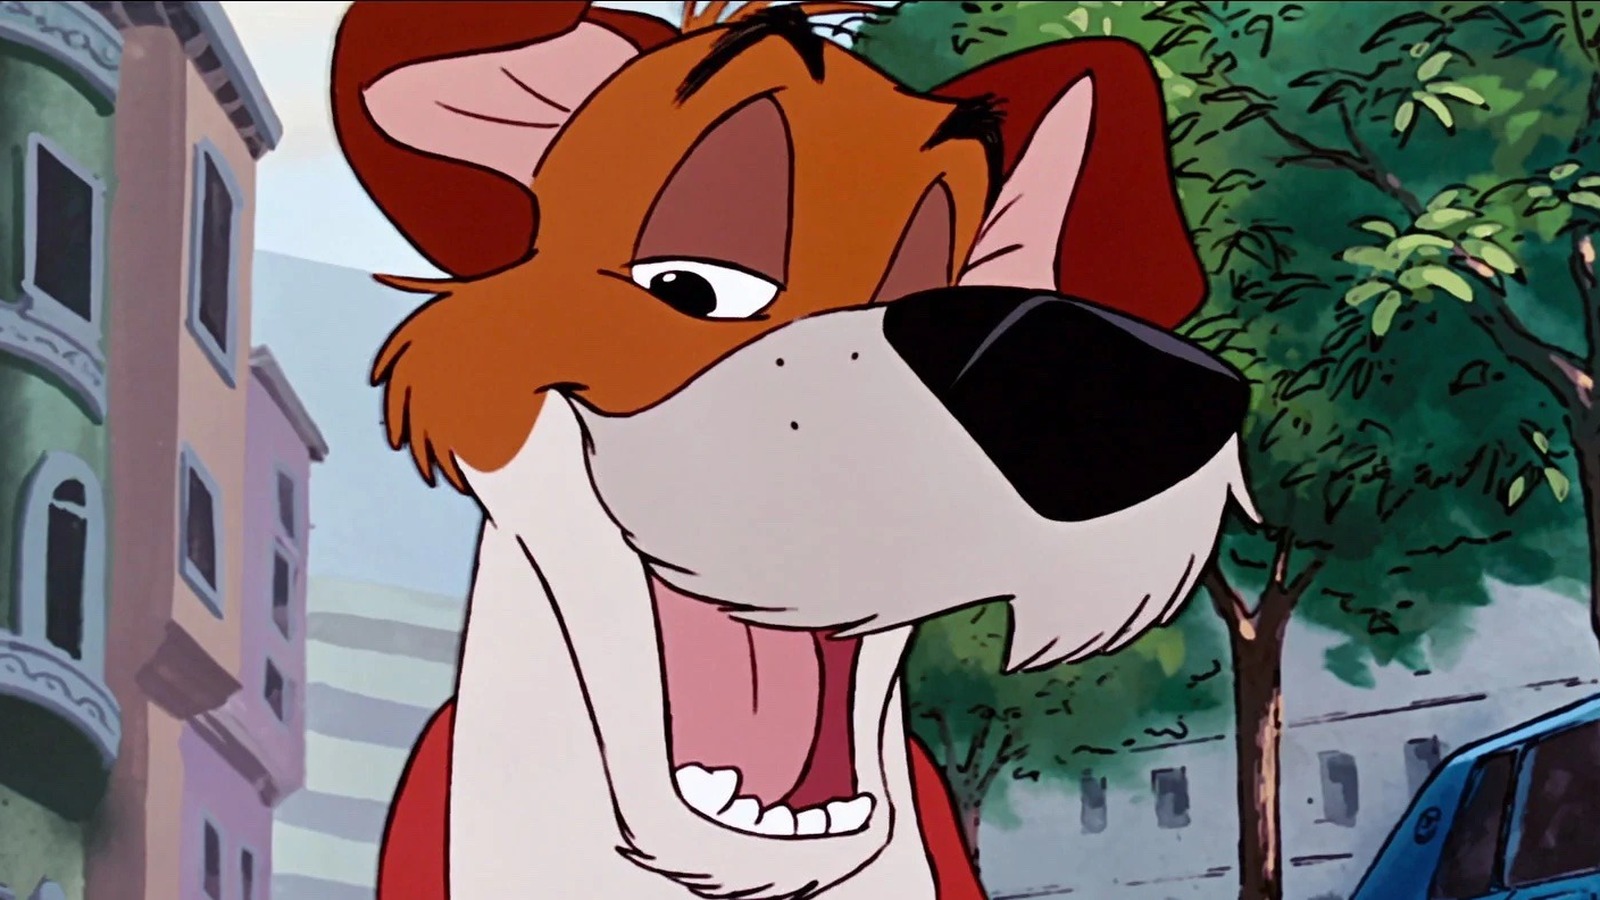 Production Changes: Disney's Oliver and Company